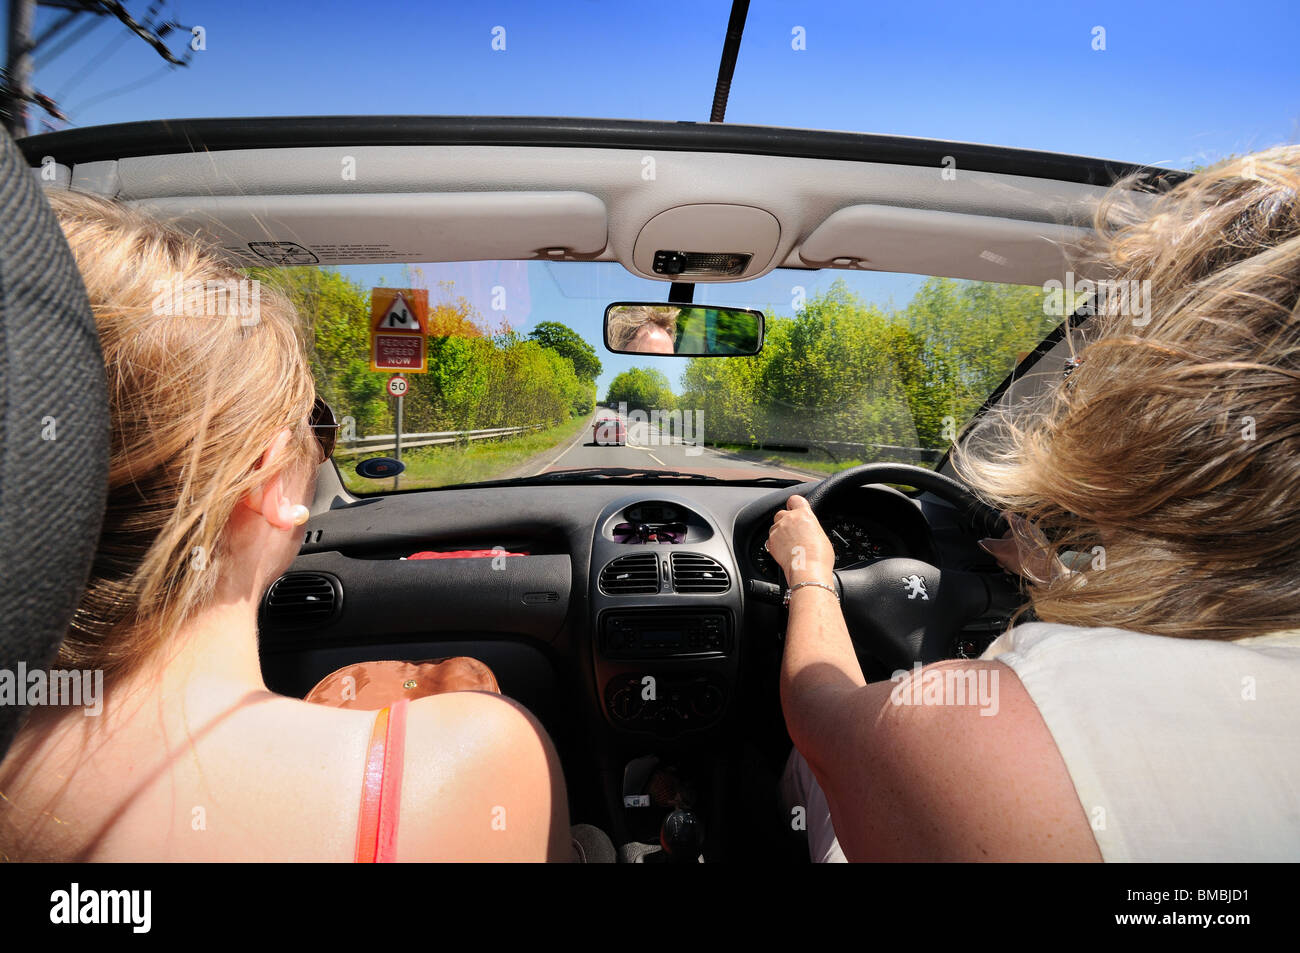 Open top car with female driver and passenger on open road Stock Photo